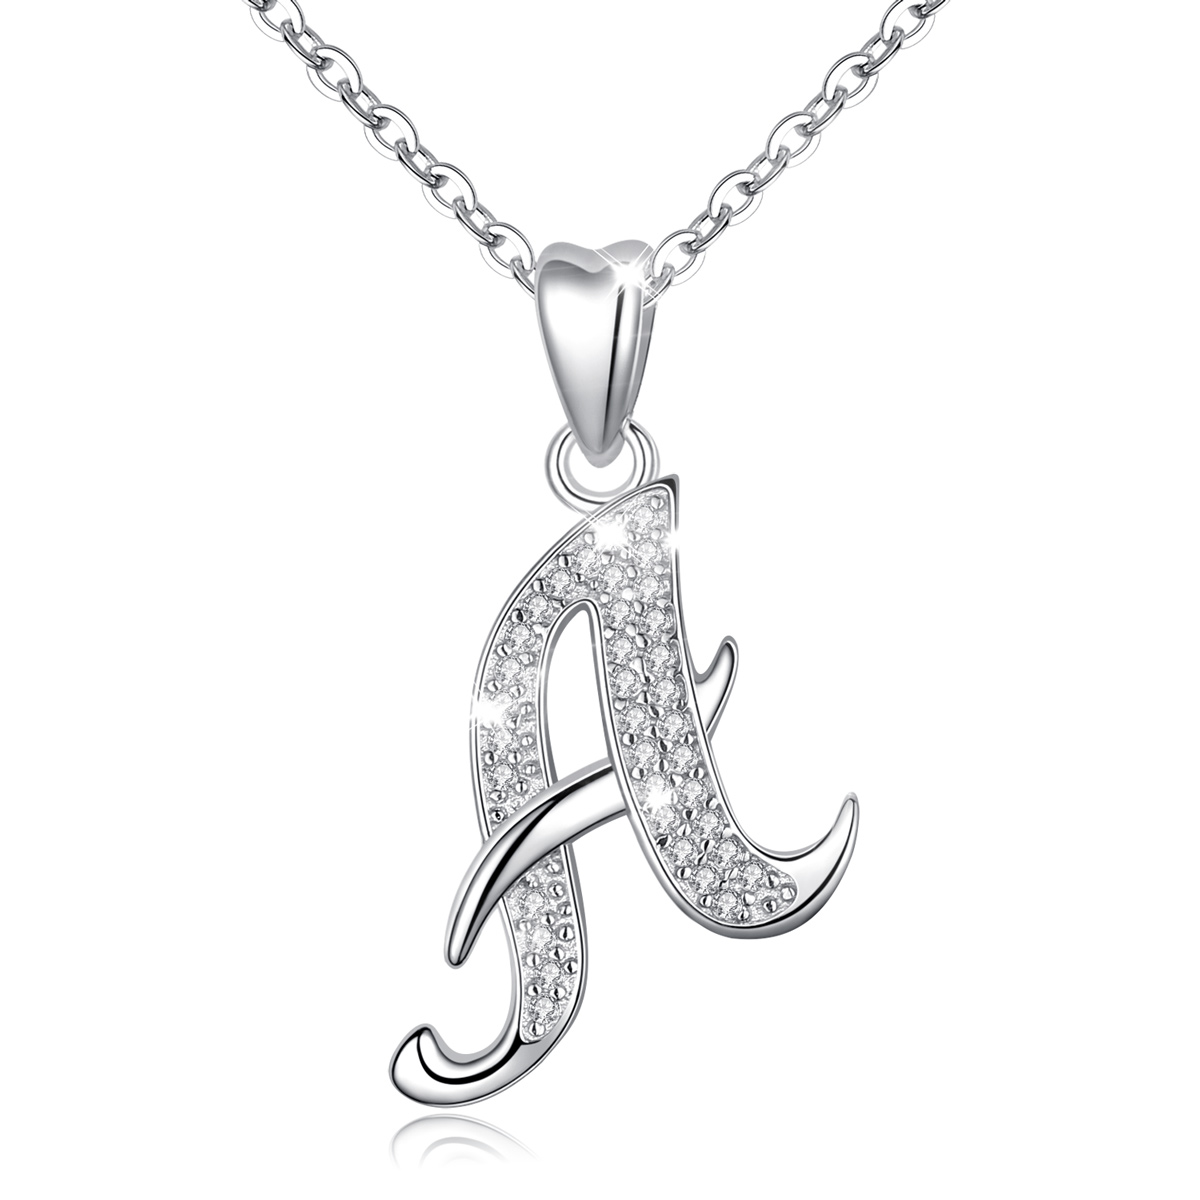 Merryshine Jewelry 925 Sterling Silver A-Z initial 26 Letter Pendant Necklace with Cubic Zirconia